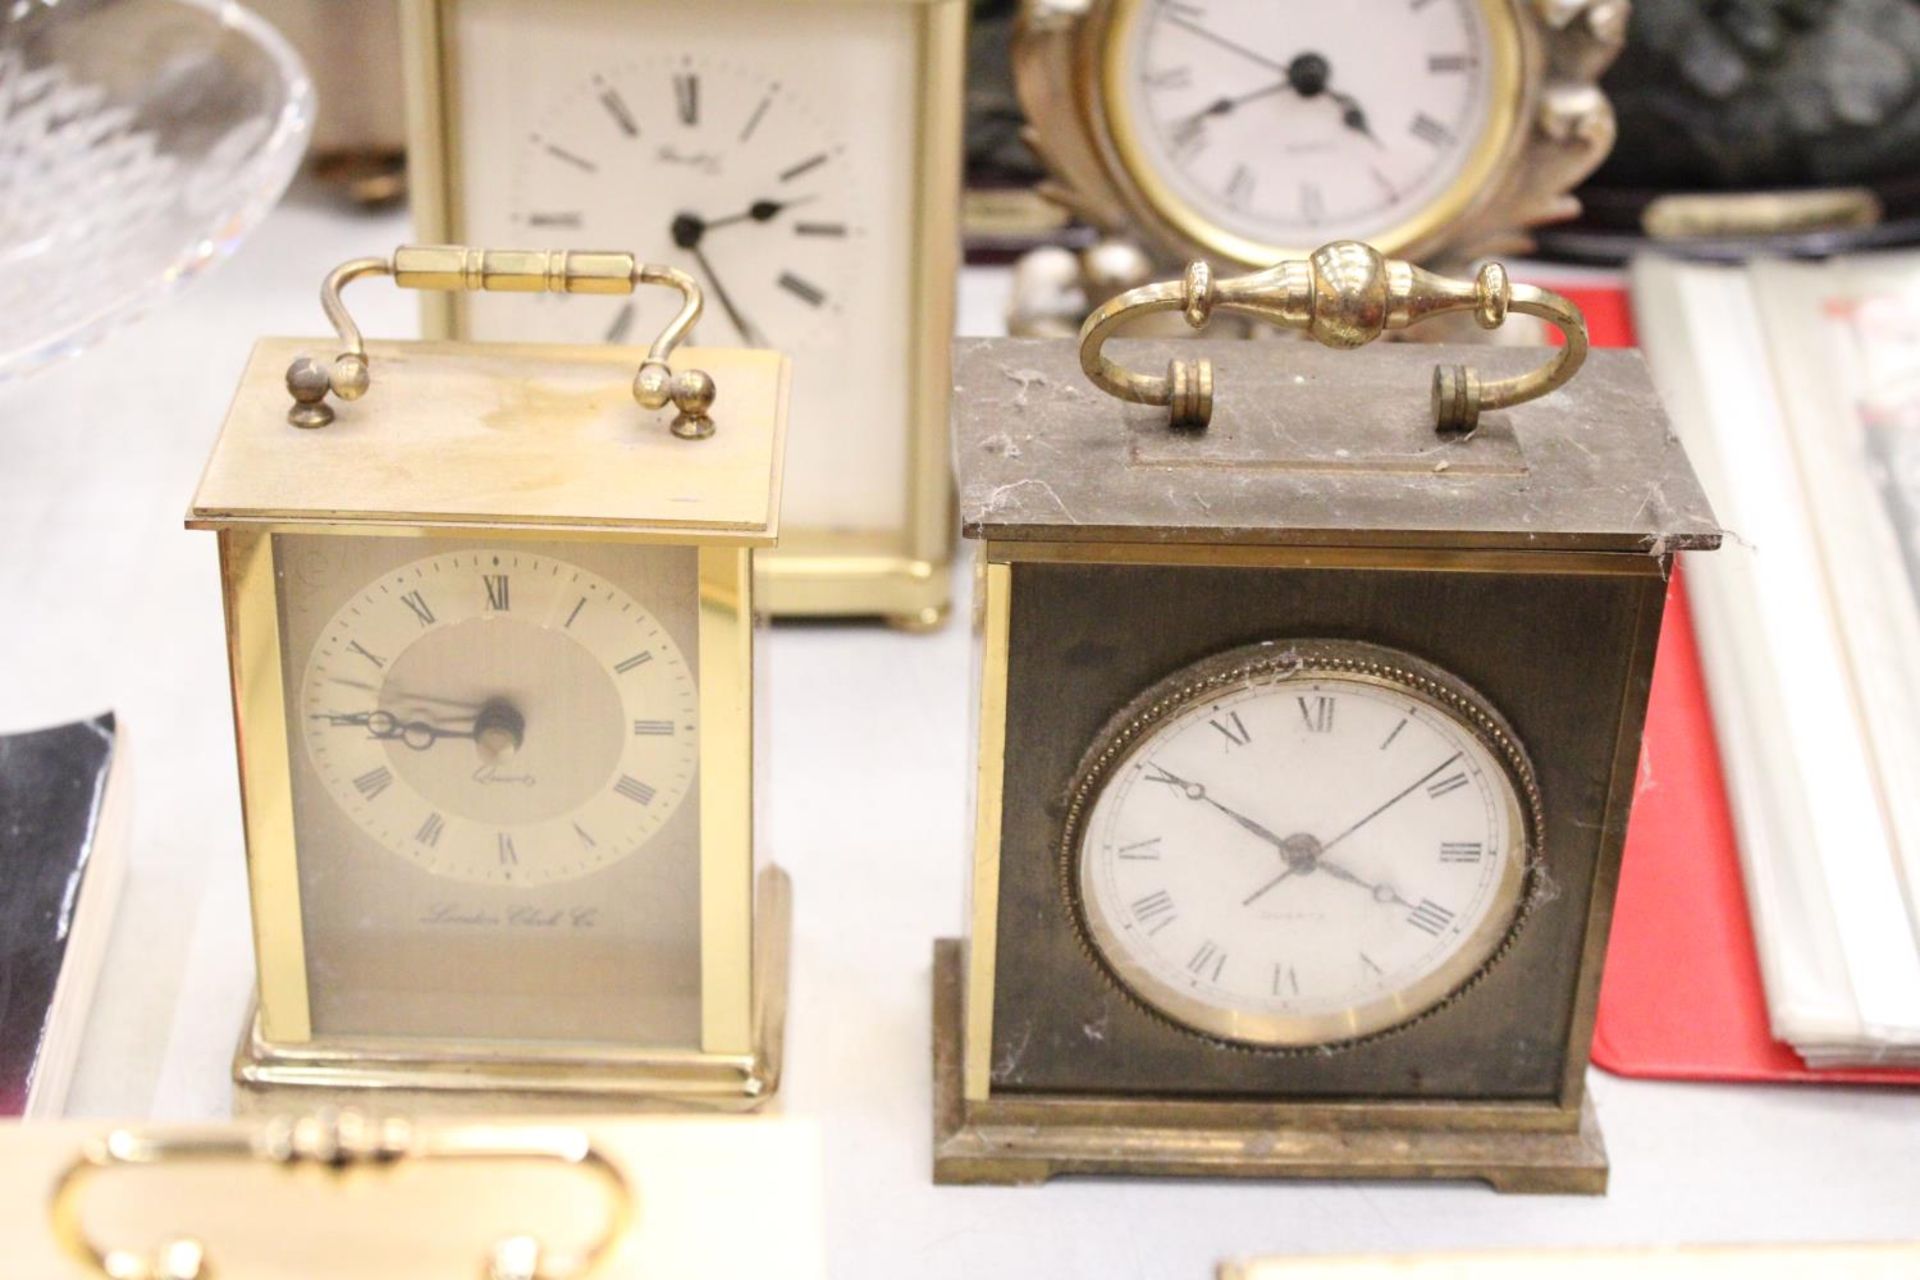 SIX MANTLE CLOCKS TO INCLUDE FIVE CARRIAGE CLOCKS - Image 3 of 5